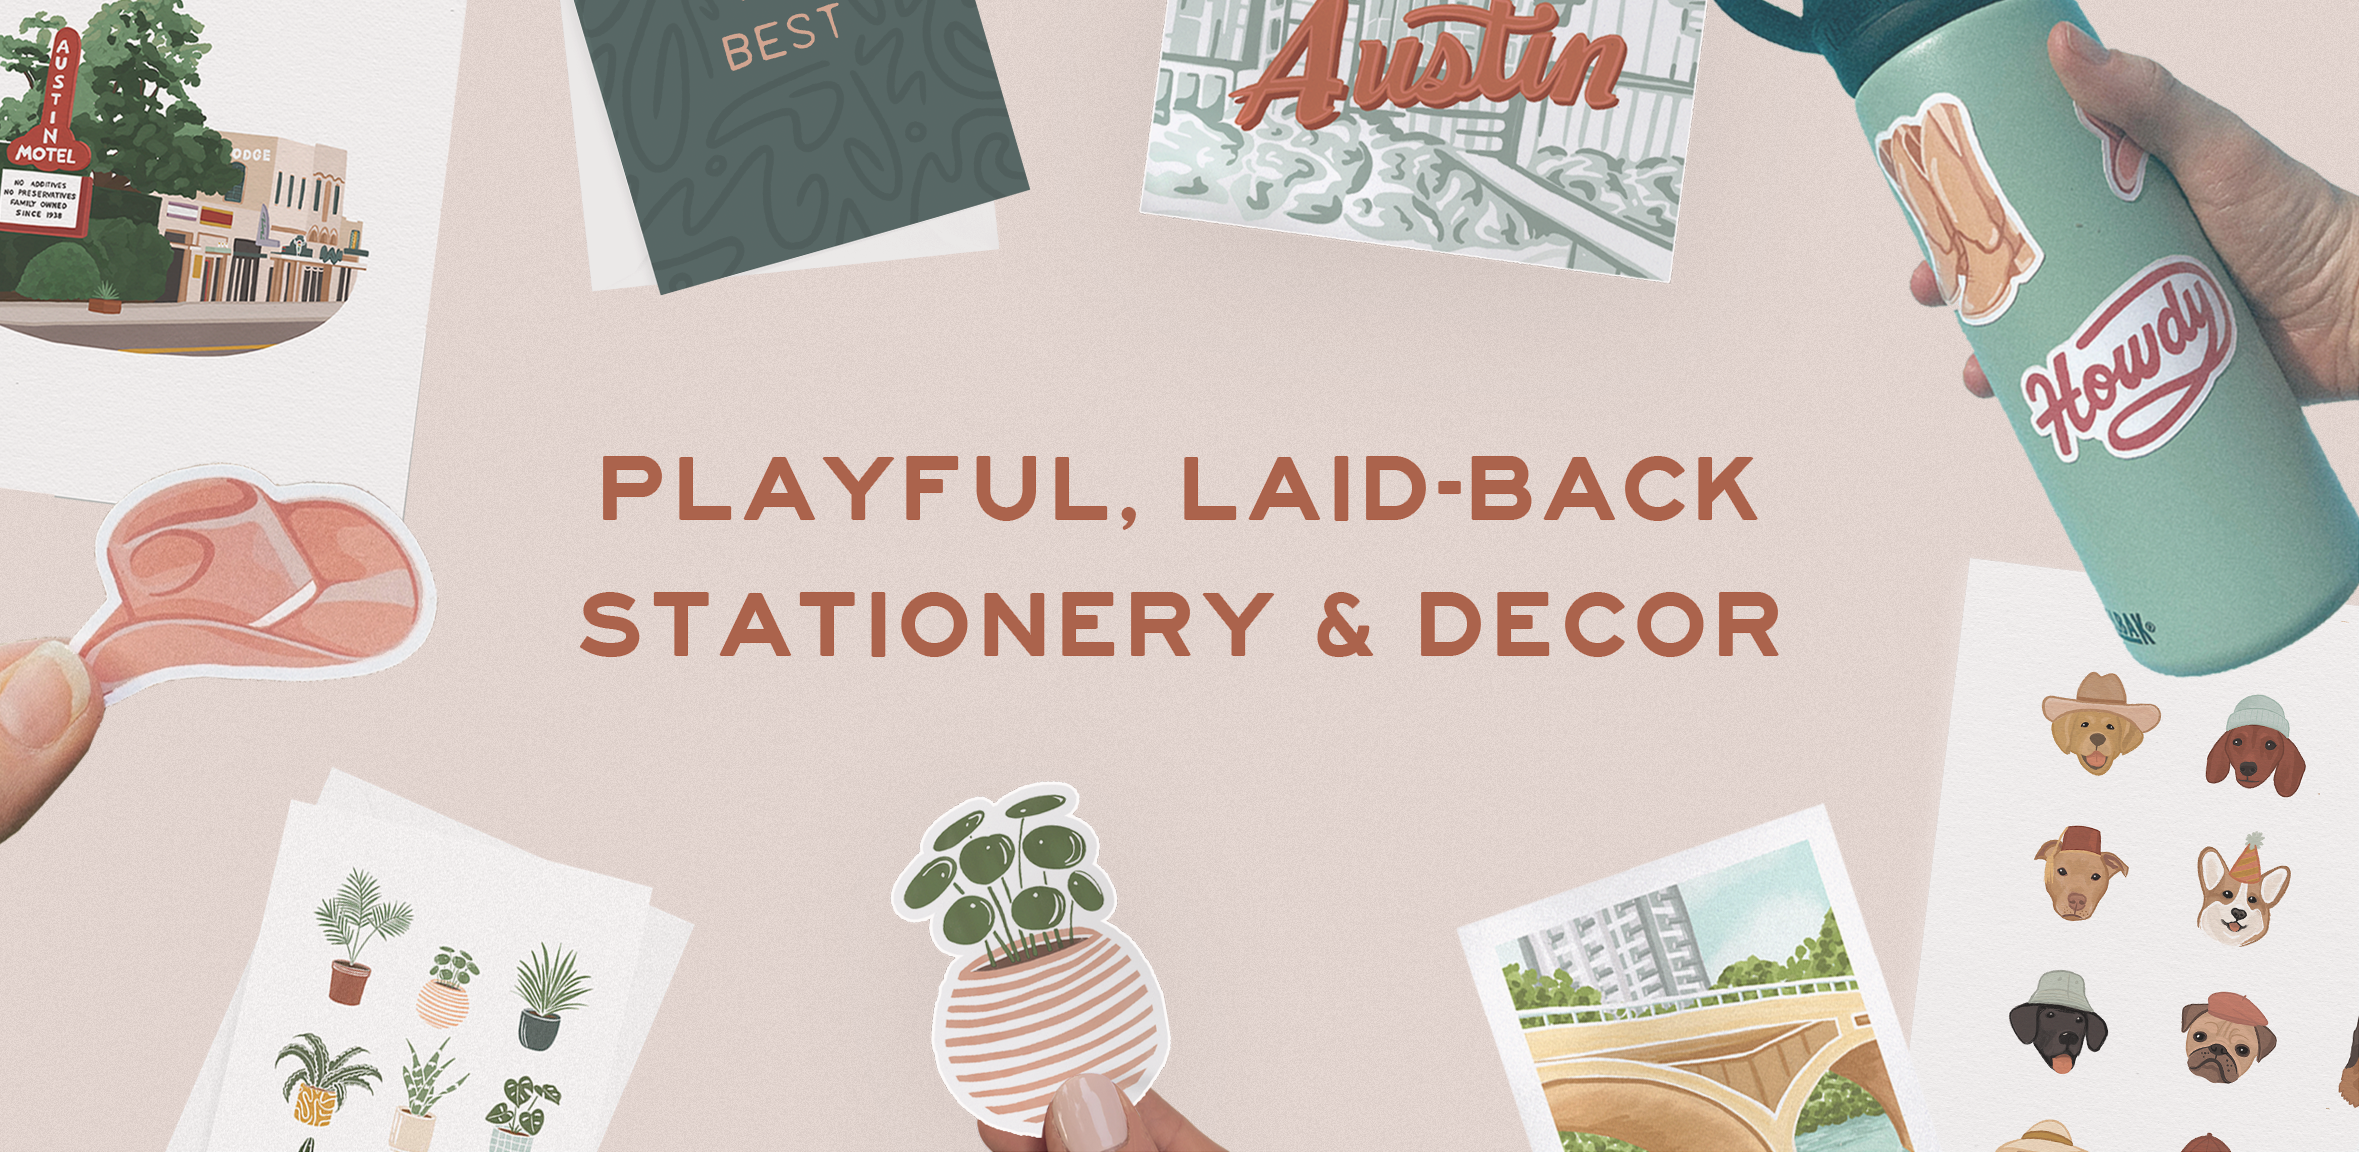 Collage of stickers, cards, and art prints with text "playful, laid-back stationery & decor"